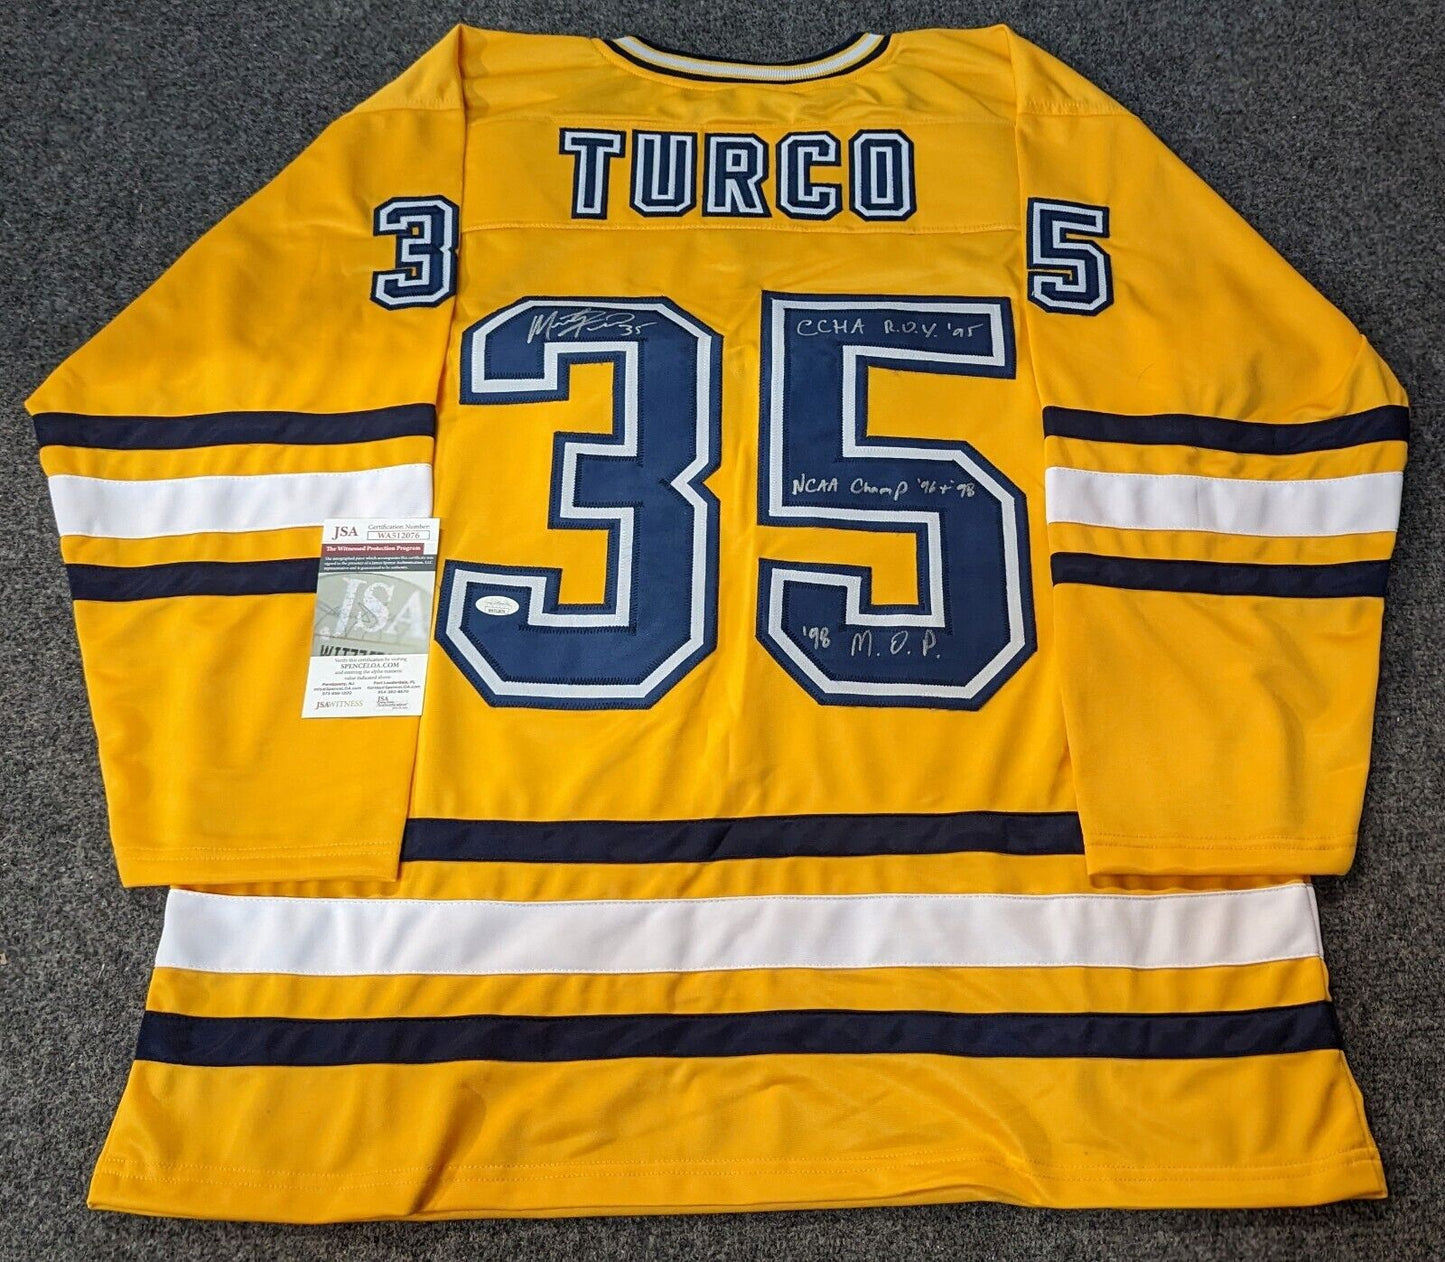 Unbranded Michigan Wolverines Marty Turco Autographed Signed 3X Inscribed Jersey Jsa Coa 157.50 sports jersey framing , jersey framing